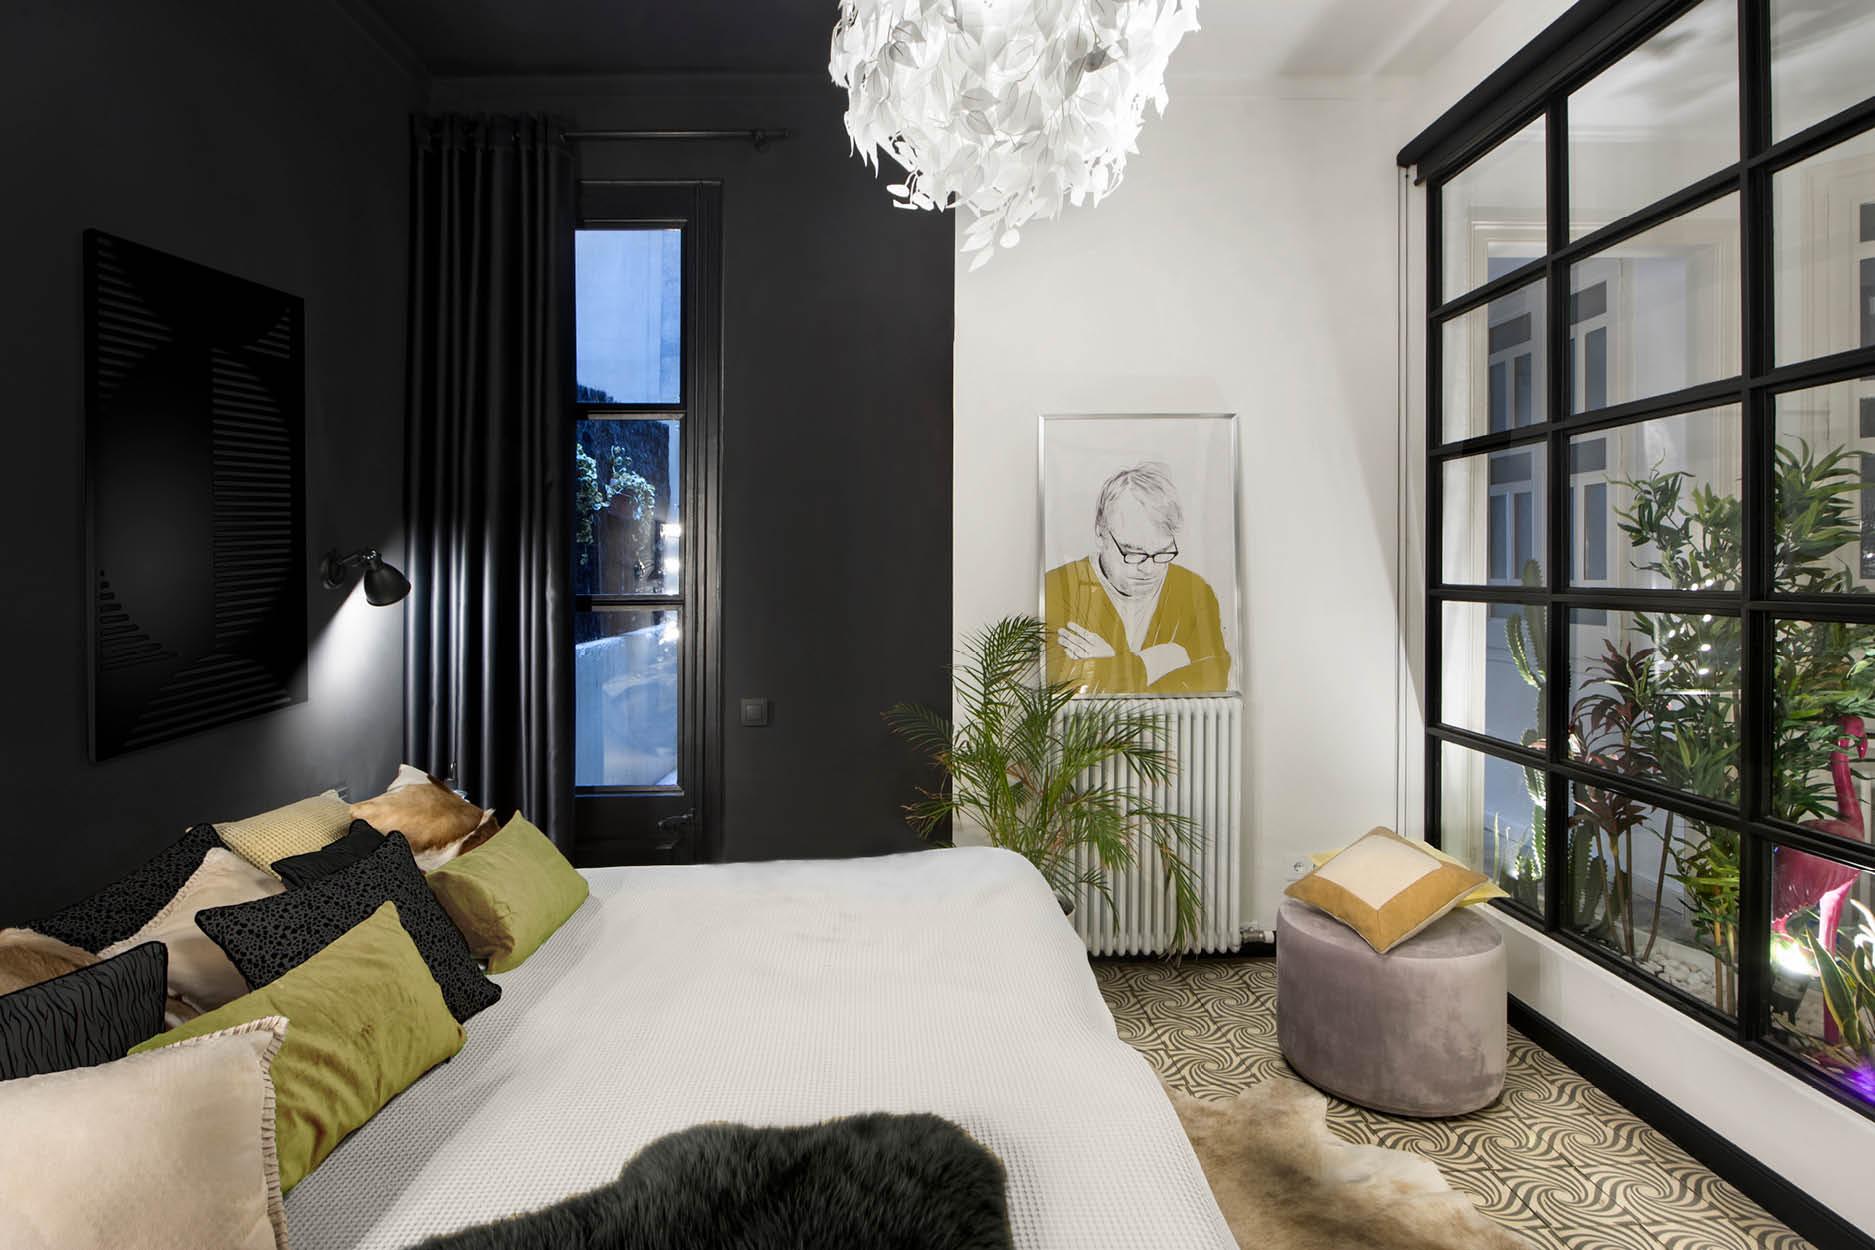 Multiple Design Styles Coexist in This Ecclectic, Barcelona Apartment